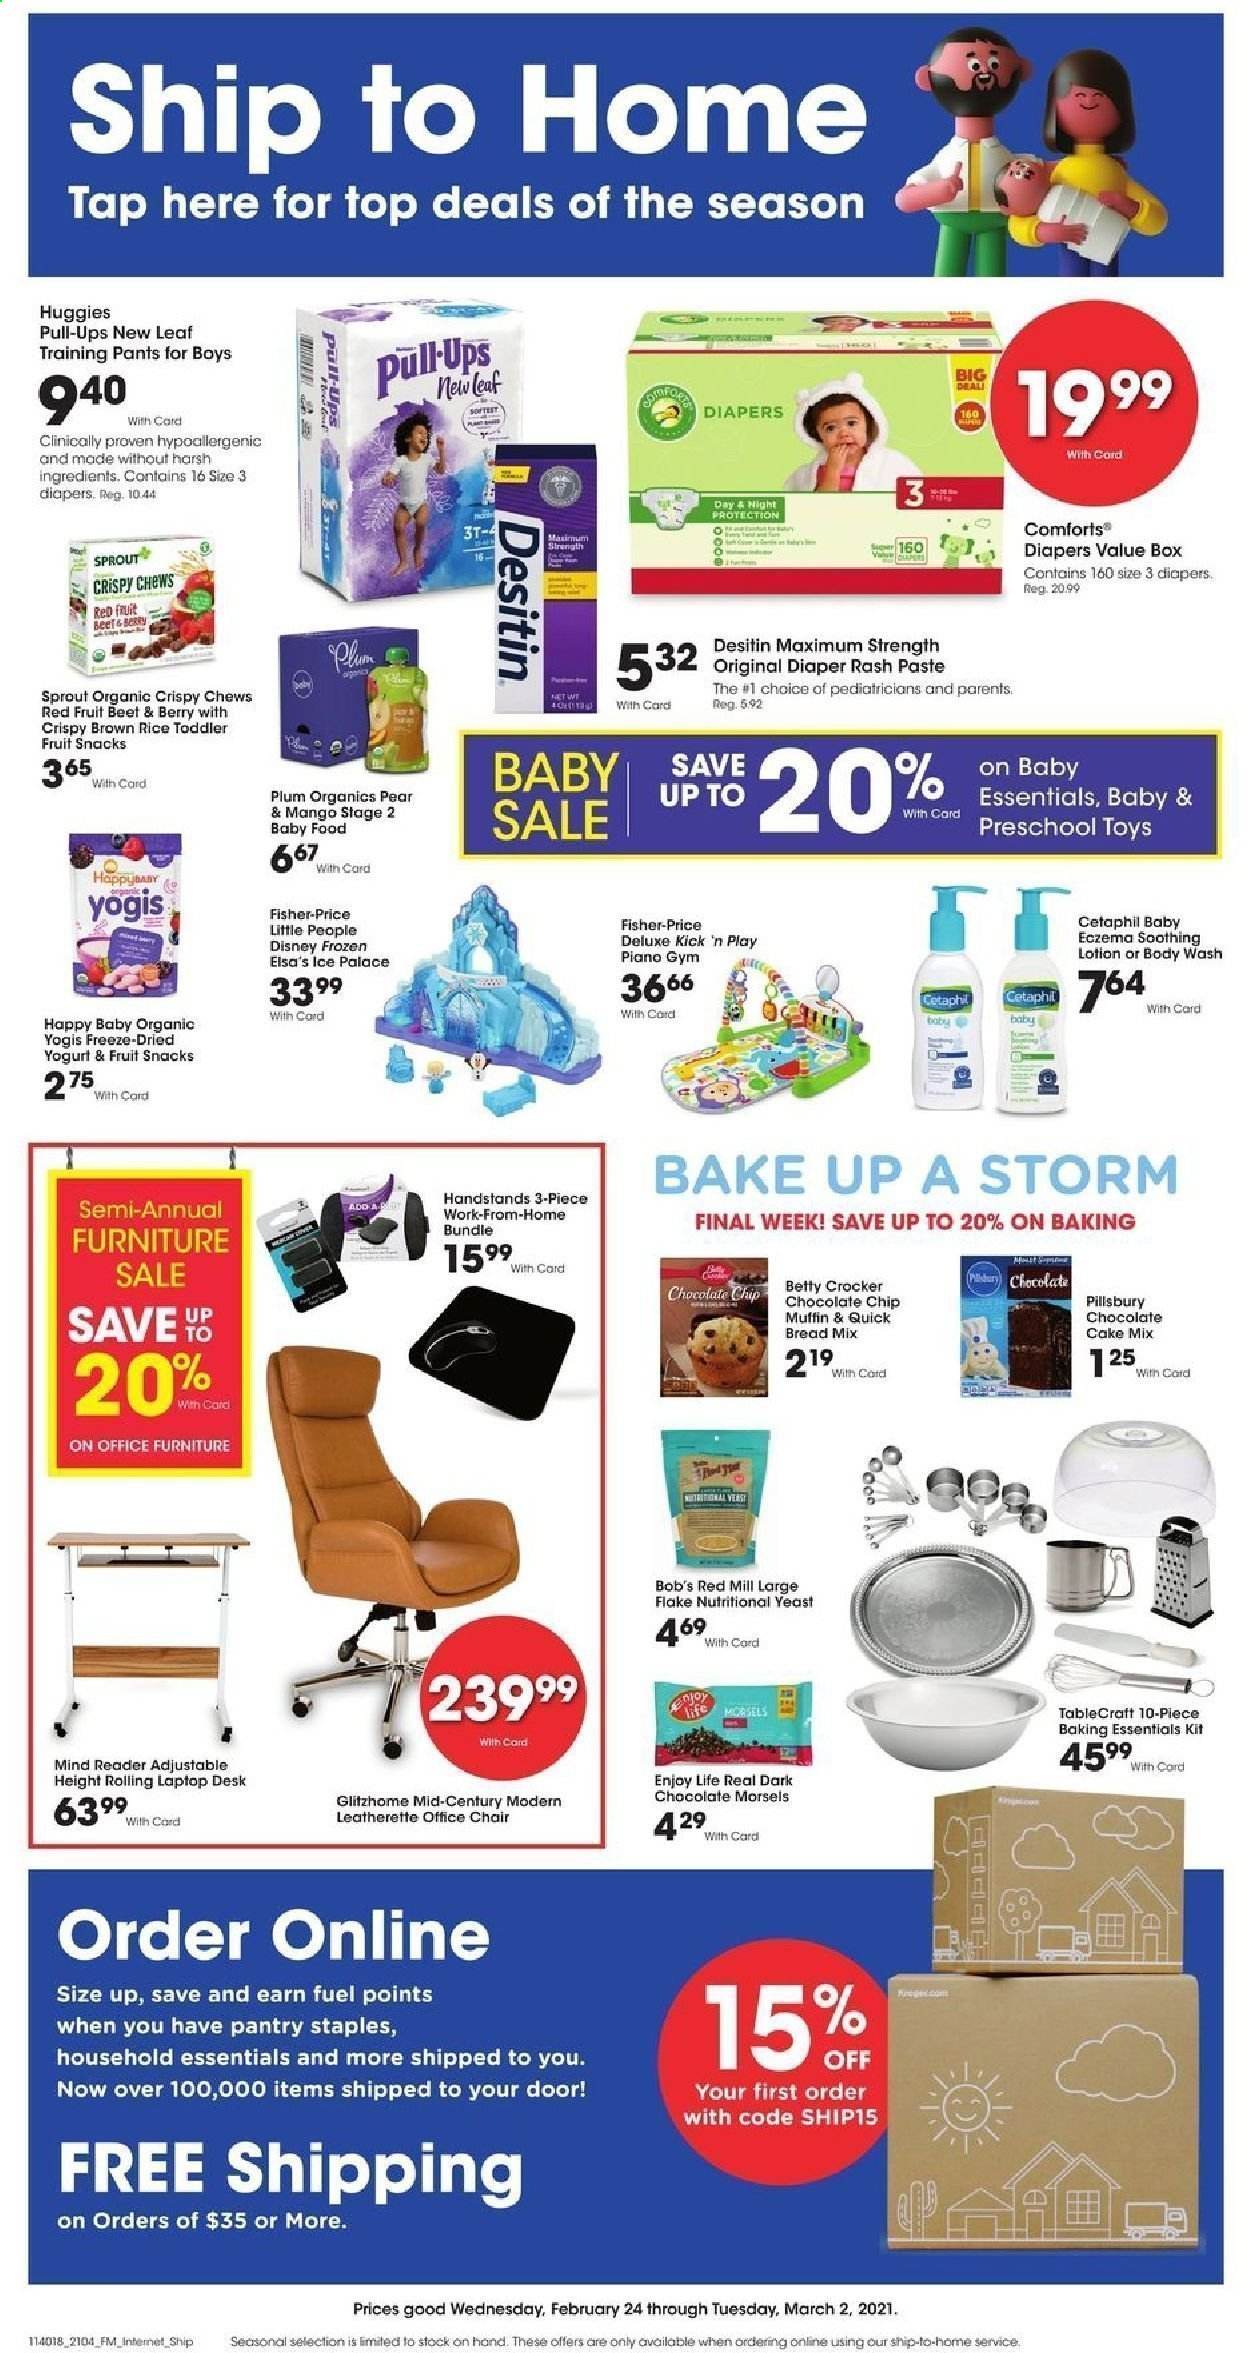 thumbnail - King Soopers Flyer - 02/24/2021 - 03/02/2021 - Sales products - laptop desk, chair, office chair, bread, cake mix, muffin, Pillsbury, yoghurt, dark chocolate, fruit snack, crispy chews, brown rice, Huggies, baby pants, Disney, body wash, body lotion, baking accessories, Little People, pants, toys, Fisher-Price, Desitin. Page 1.